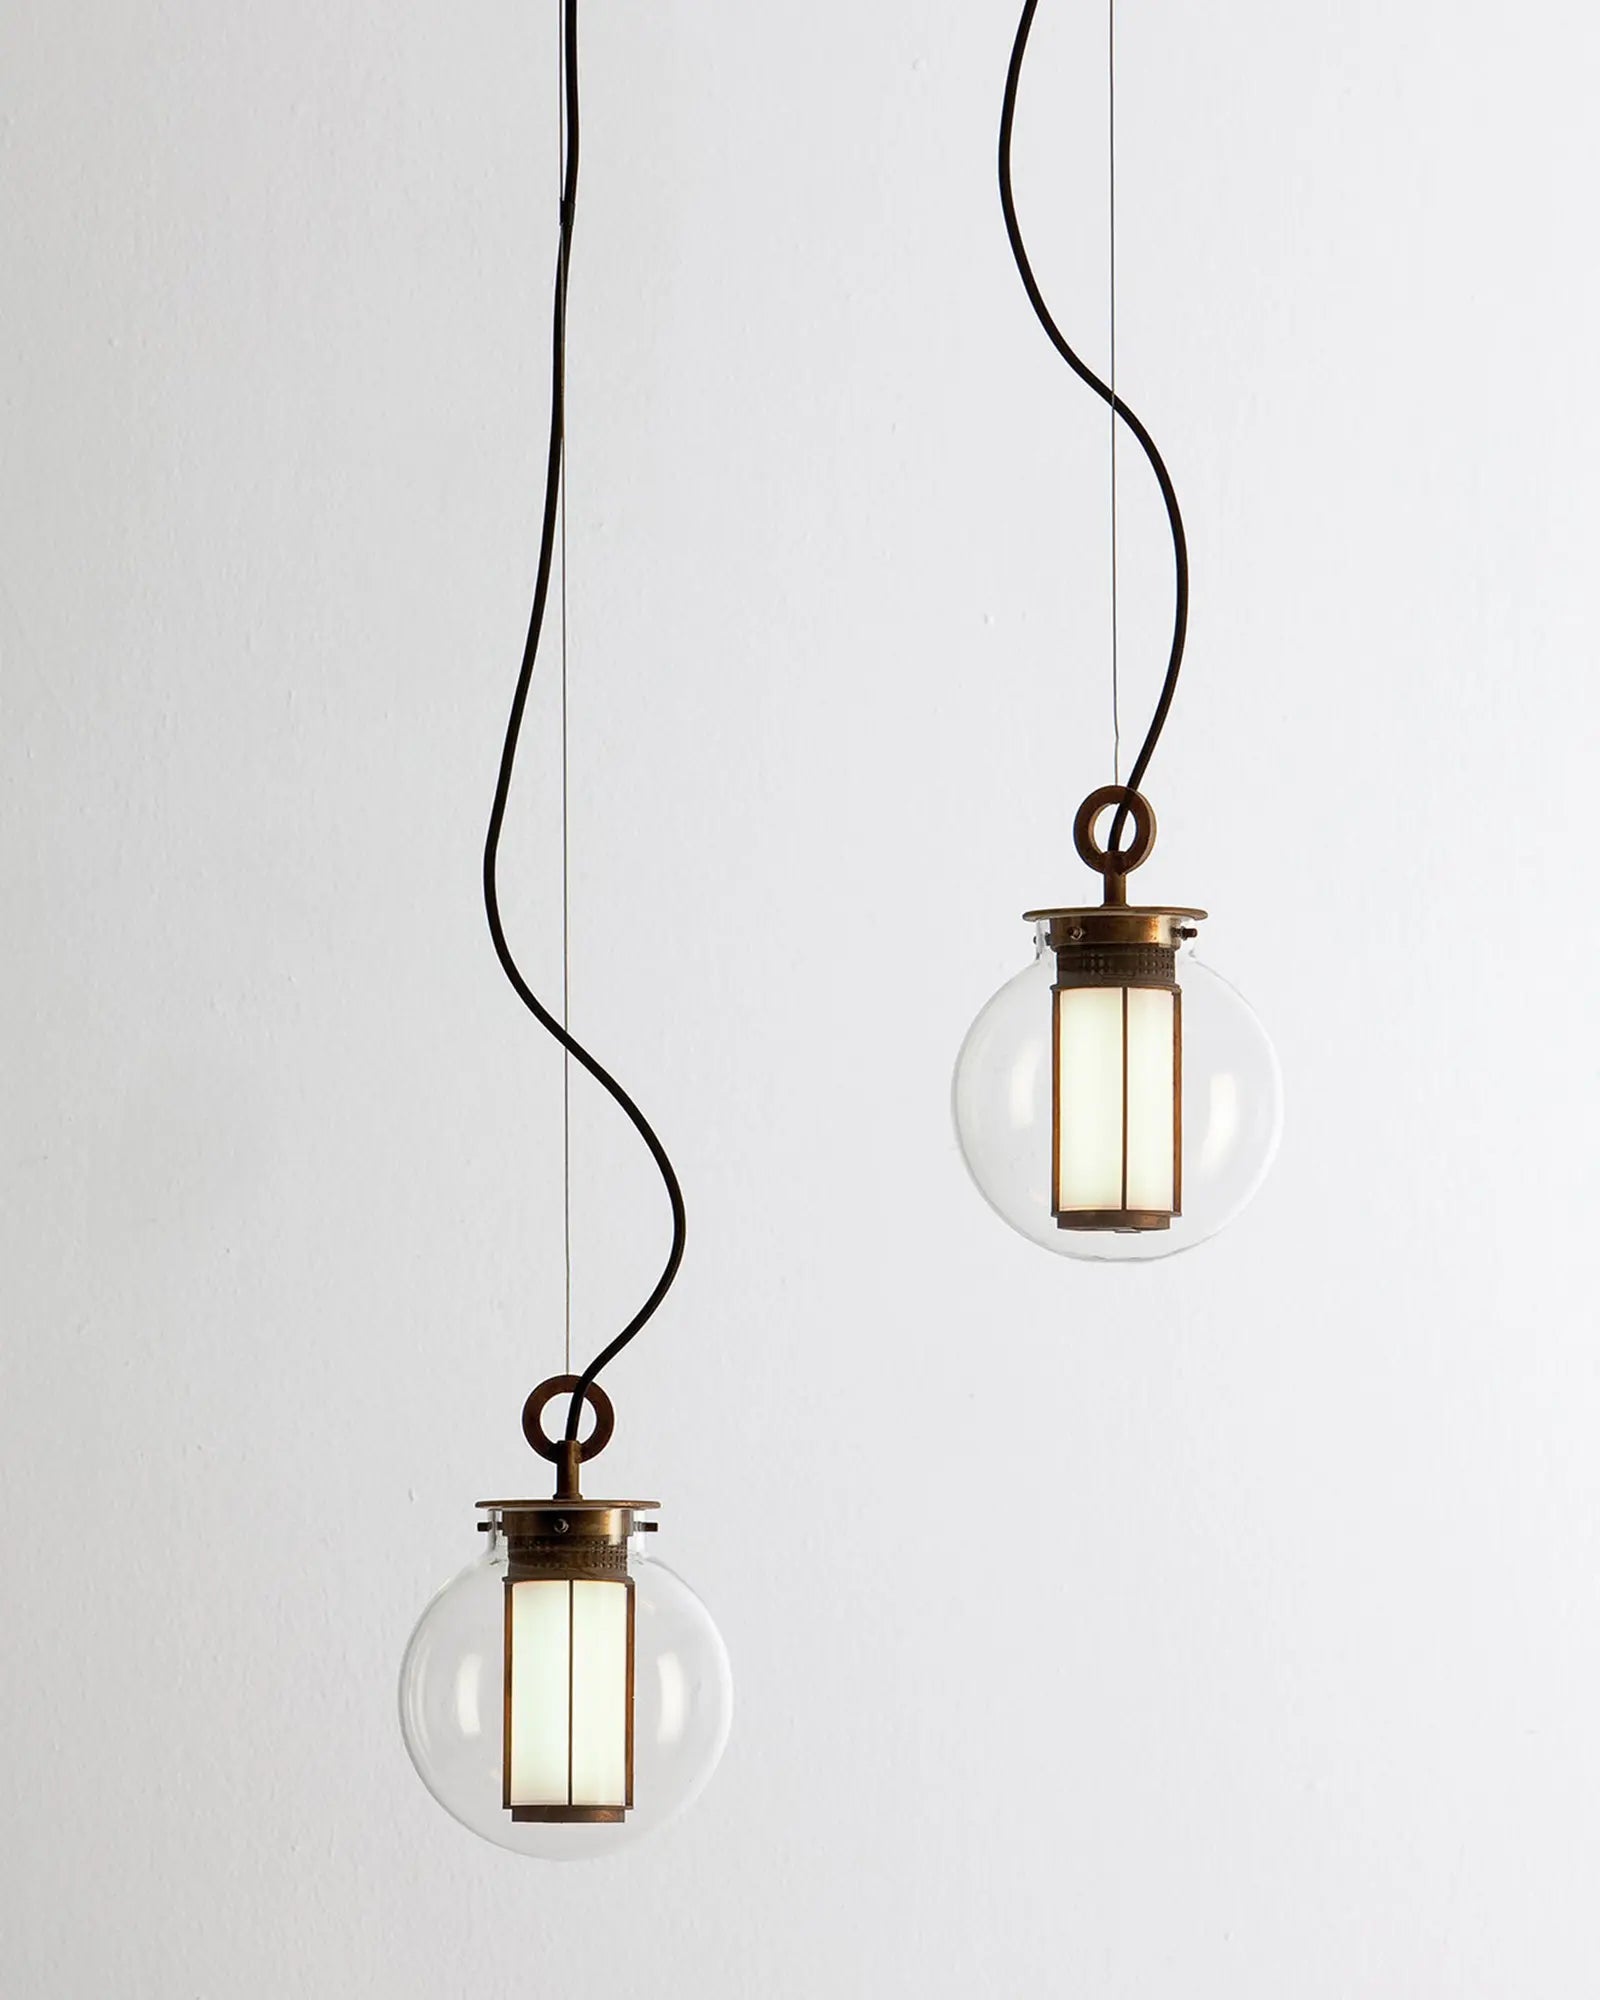 Bai di di pendant light inspired by Chinese lantern in bronze and blown glass 